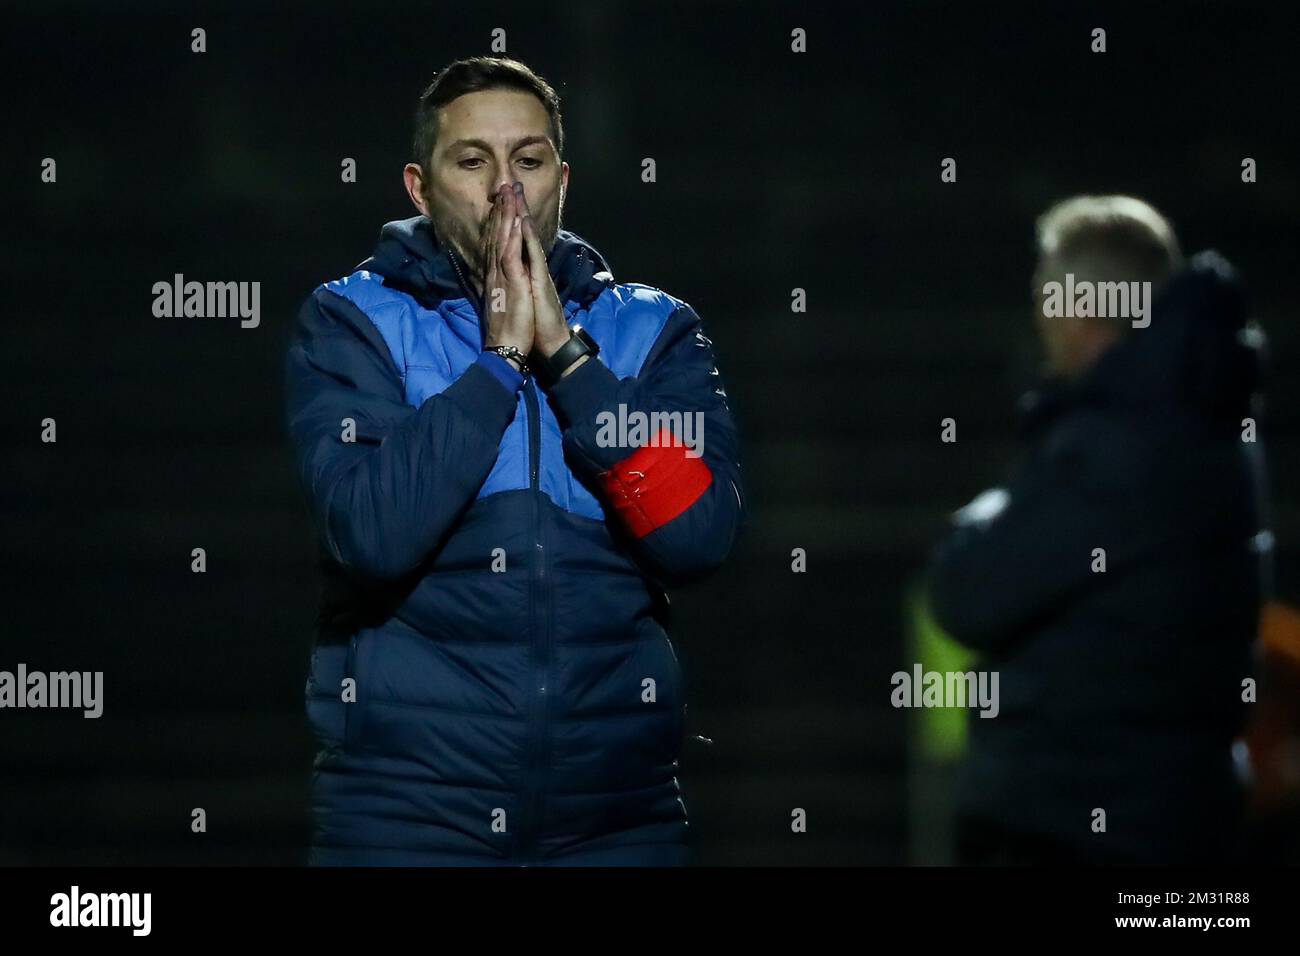 Roeselare's head coach Christophe Gamel pictured during a soccer match between KSV Roeselare and Lommel SK, Saturday 30 November 2019 in Roeselare, on day 17 of the 'Proximus League' 1B division of the Belgian soccer championship. BELGA PHOTO DAVID PINTENS Stock Photo